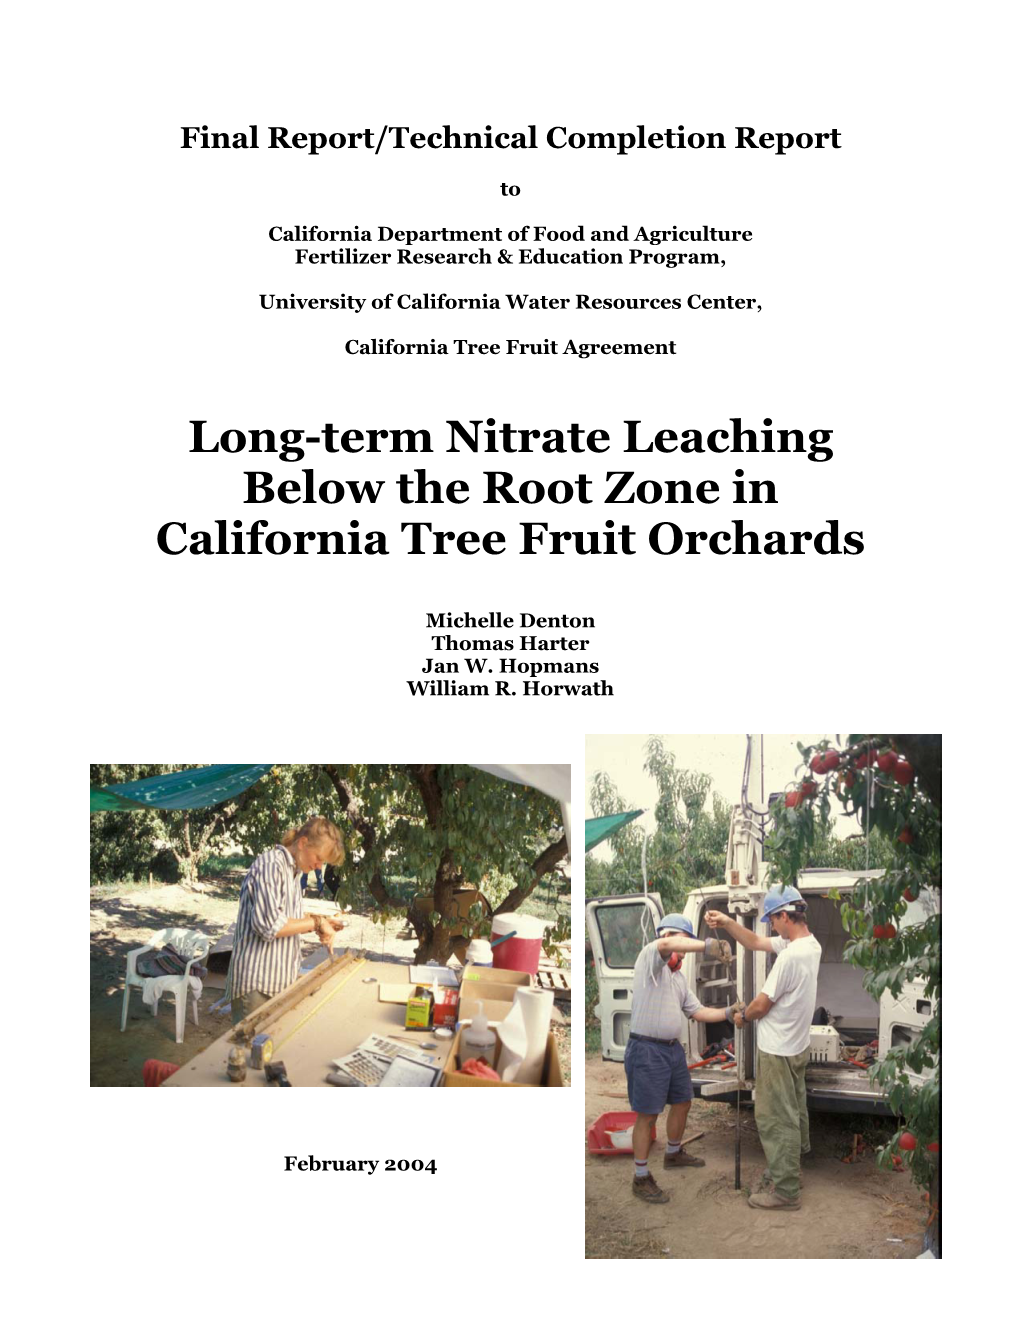 Long-Term Nitrate Leaching Below the Root Zone in California Tree Fruit Orchards